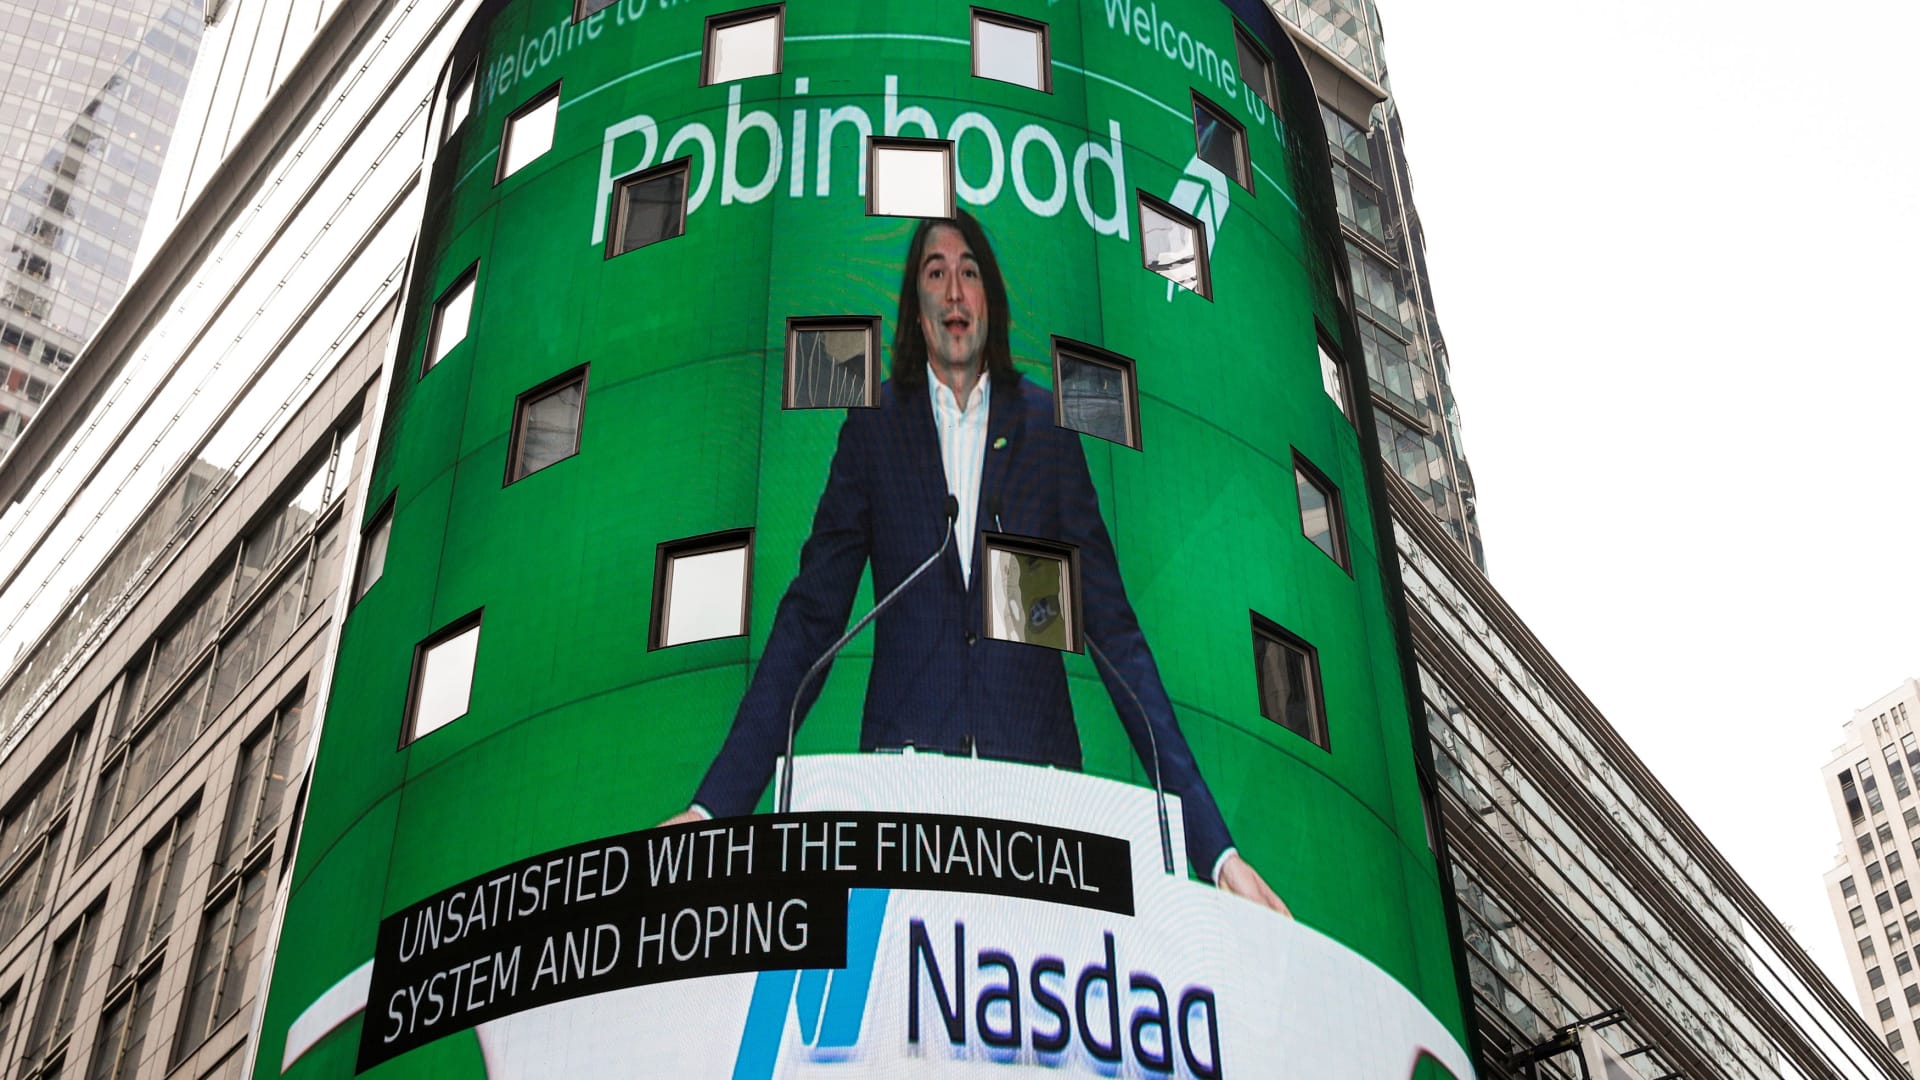 Vlad Tenev, CEO and co-founder Robinhood Markets, Inc., is displayed on a screen during his company’s IPO at the Nasdaq Market site in Times Square in New York City, U.S., July 29, 2021.